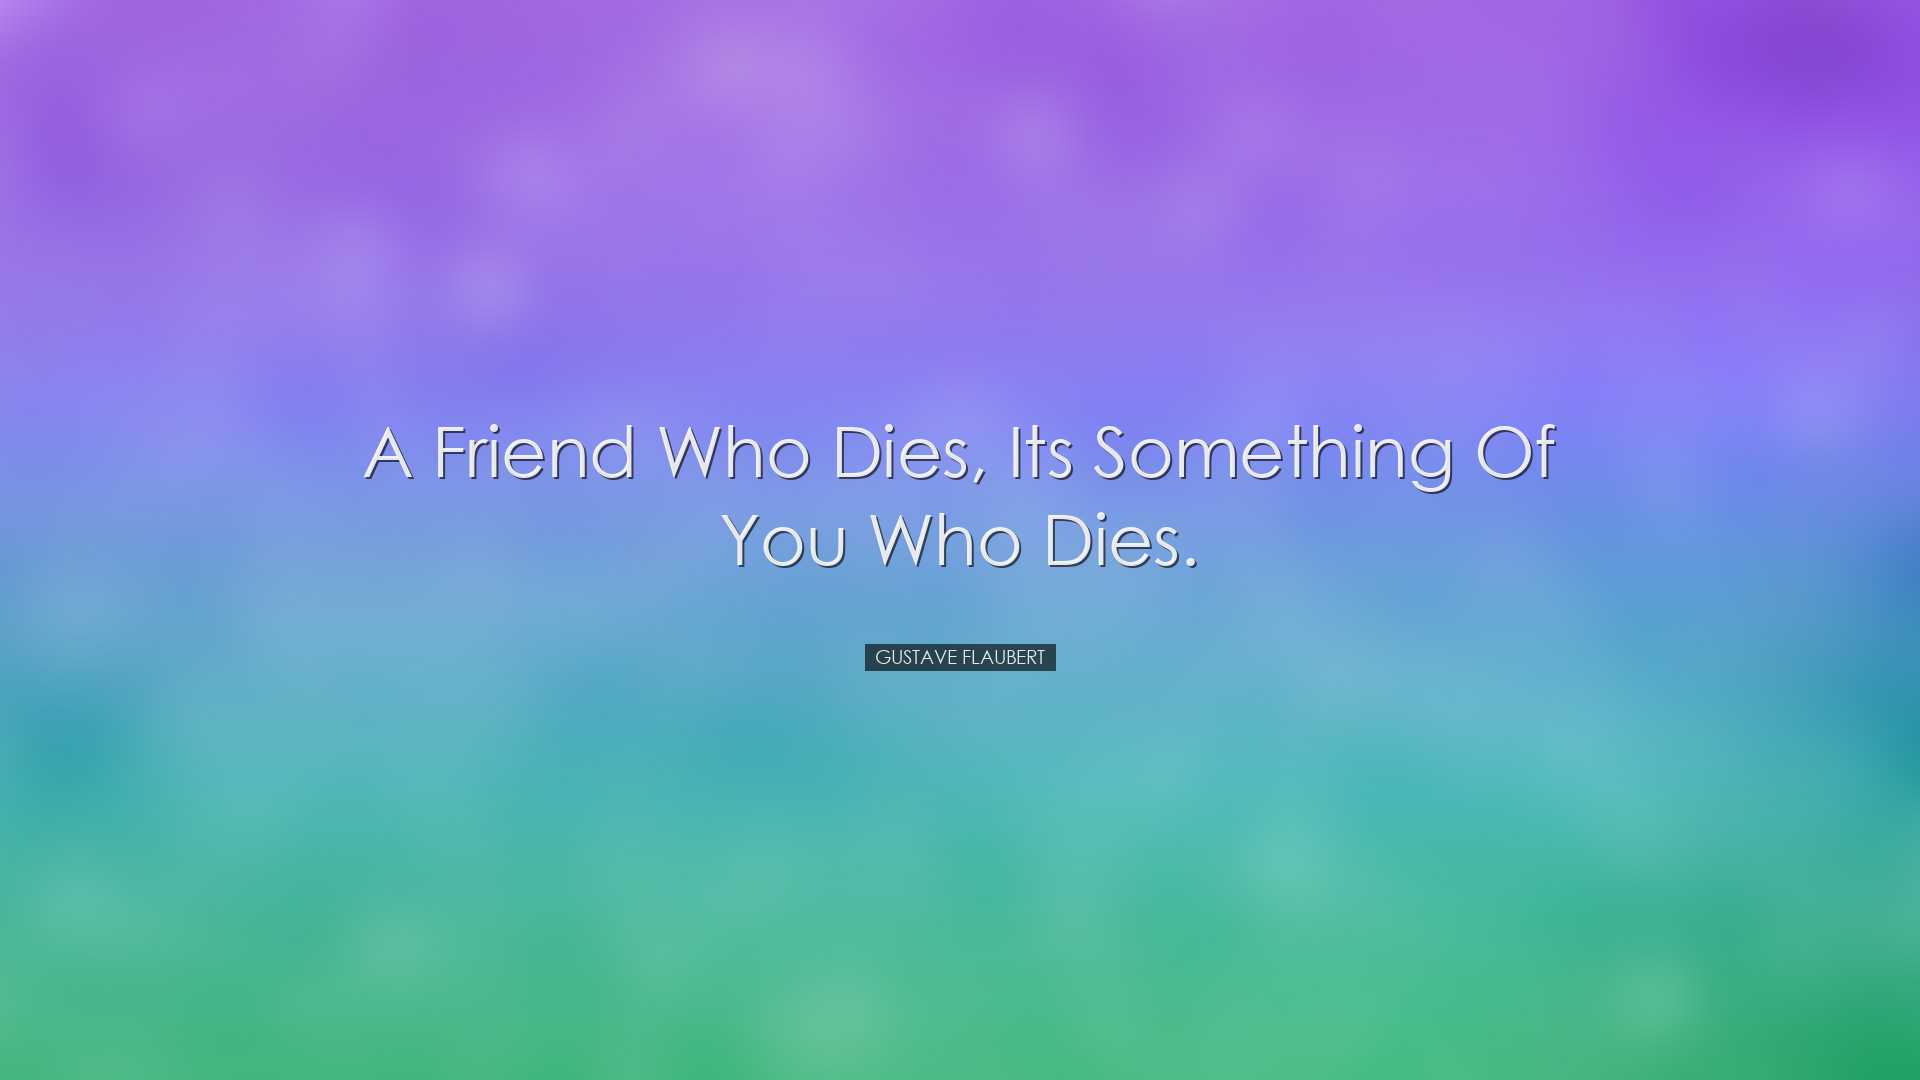 A friend who dies, its something of you who dies. - Gustave Flaube